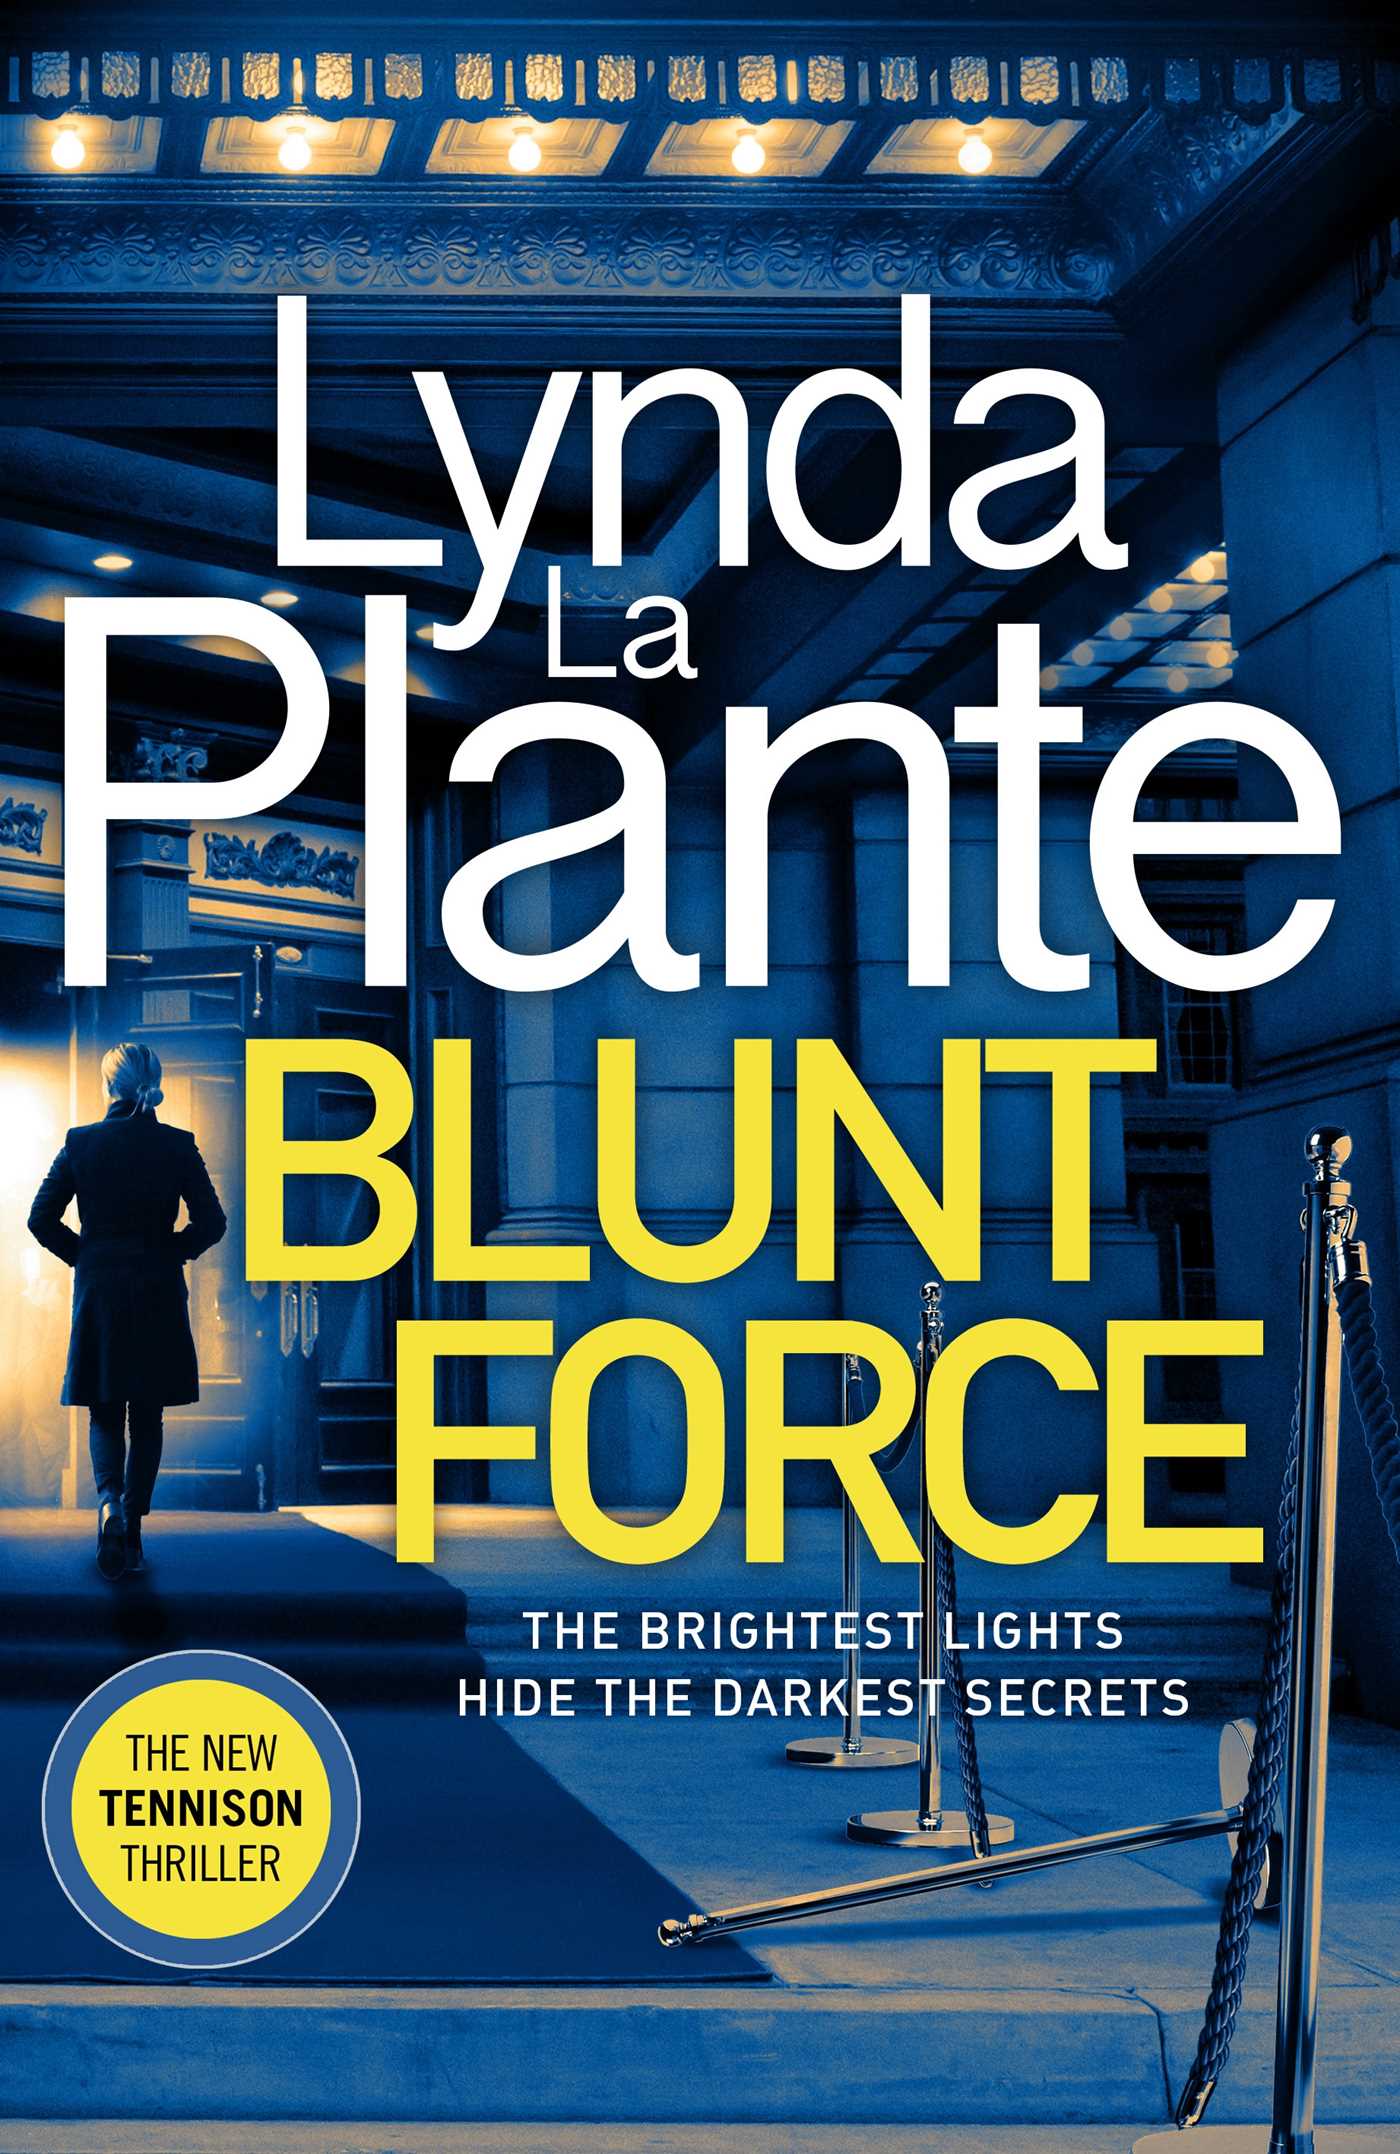 When Does Blunt Force (Tennison #6) By Lynda La Plante Come Out? 2020 Thriller & Mystery